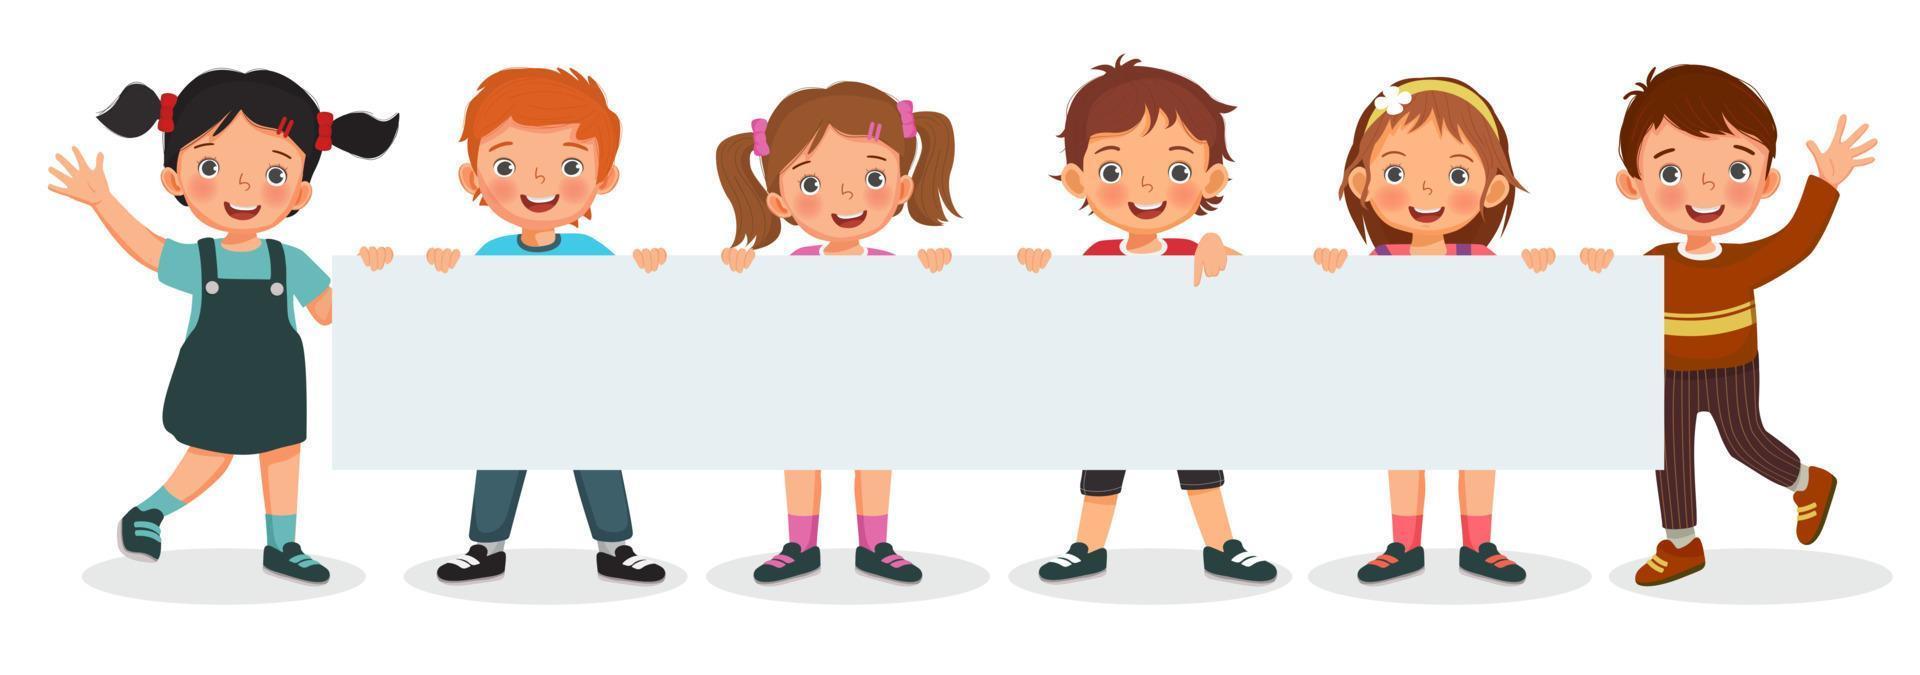 Group of children holding a long empty banner or poster. Vector of boys and girls showing placard with empty space templates for text, banner, ads